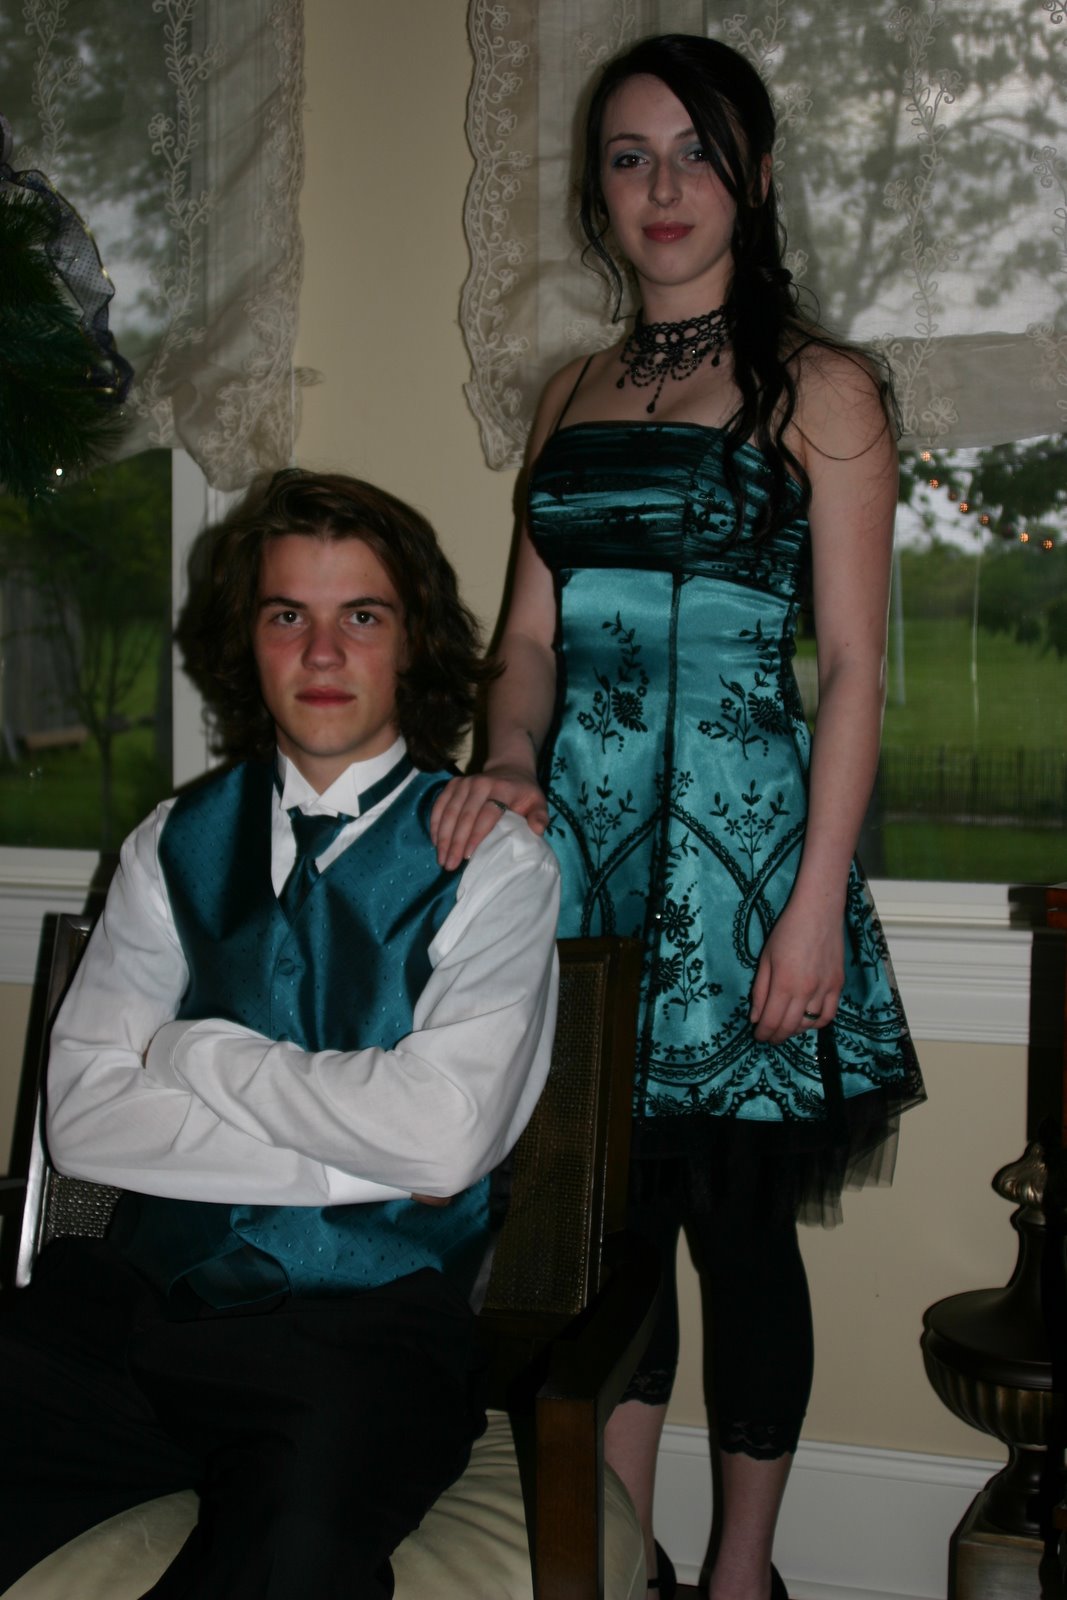 [ethan+and+canaan+prom+night+026.jpg]